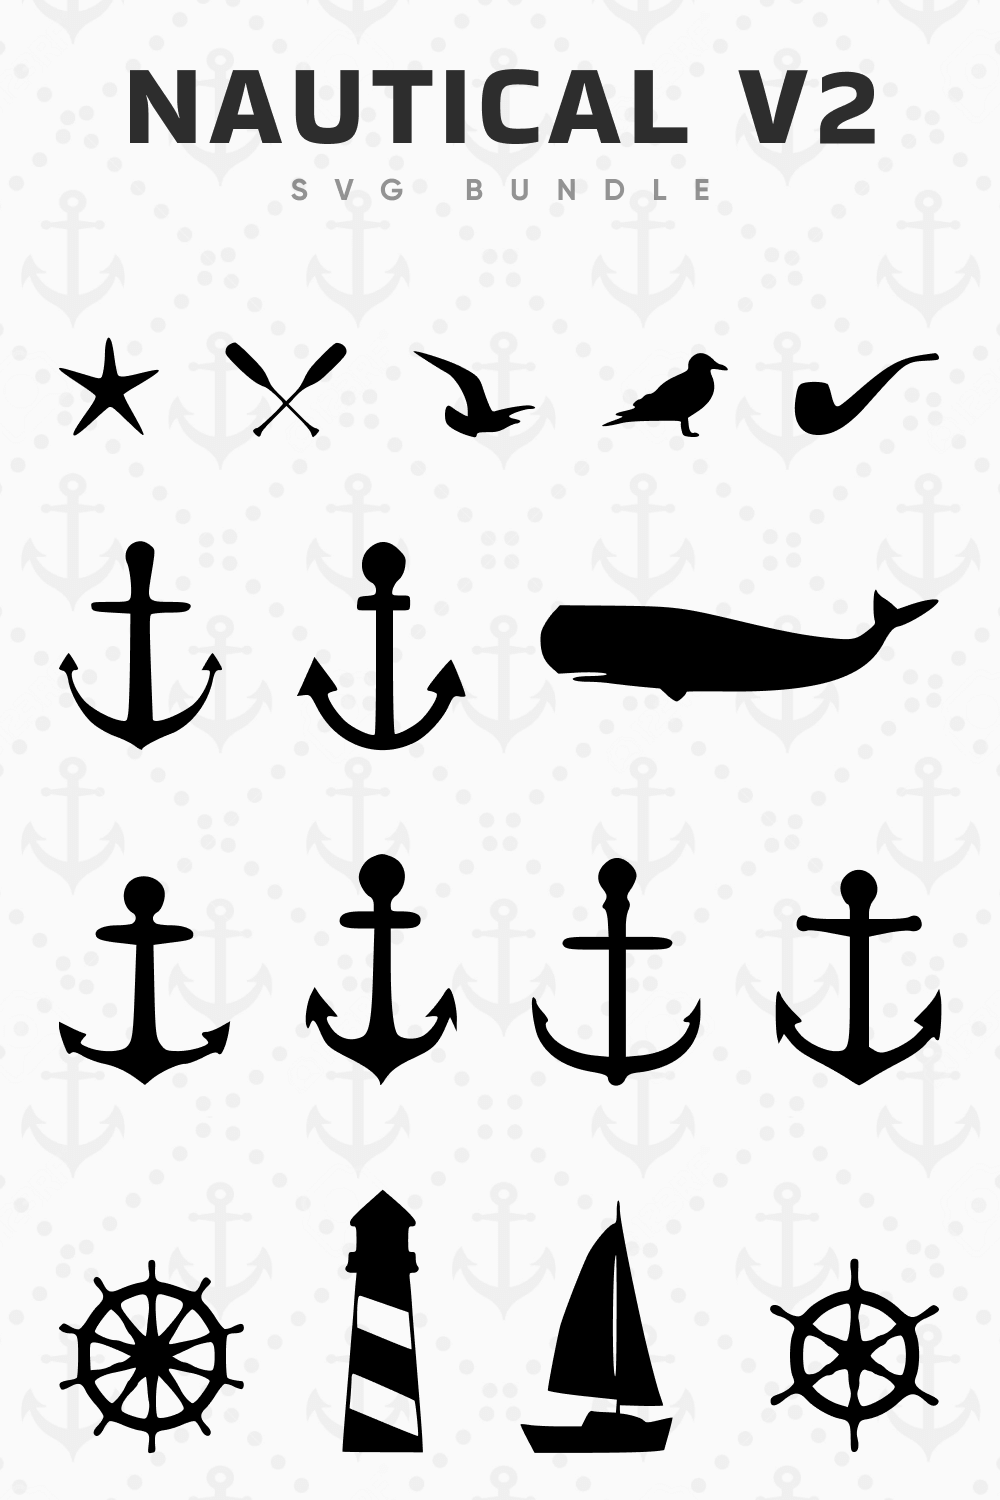 Collection Drawings of Nautical Symbols.